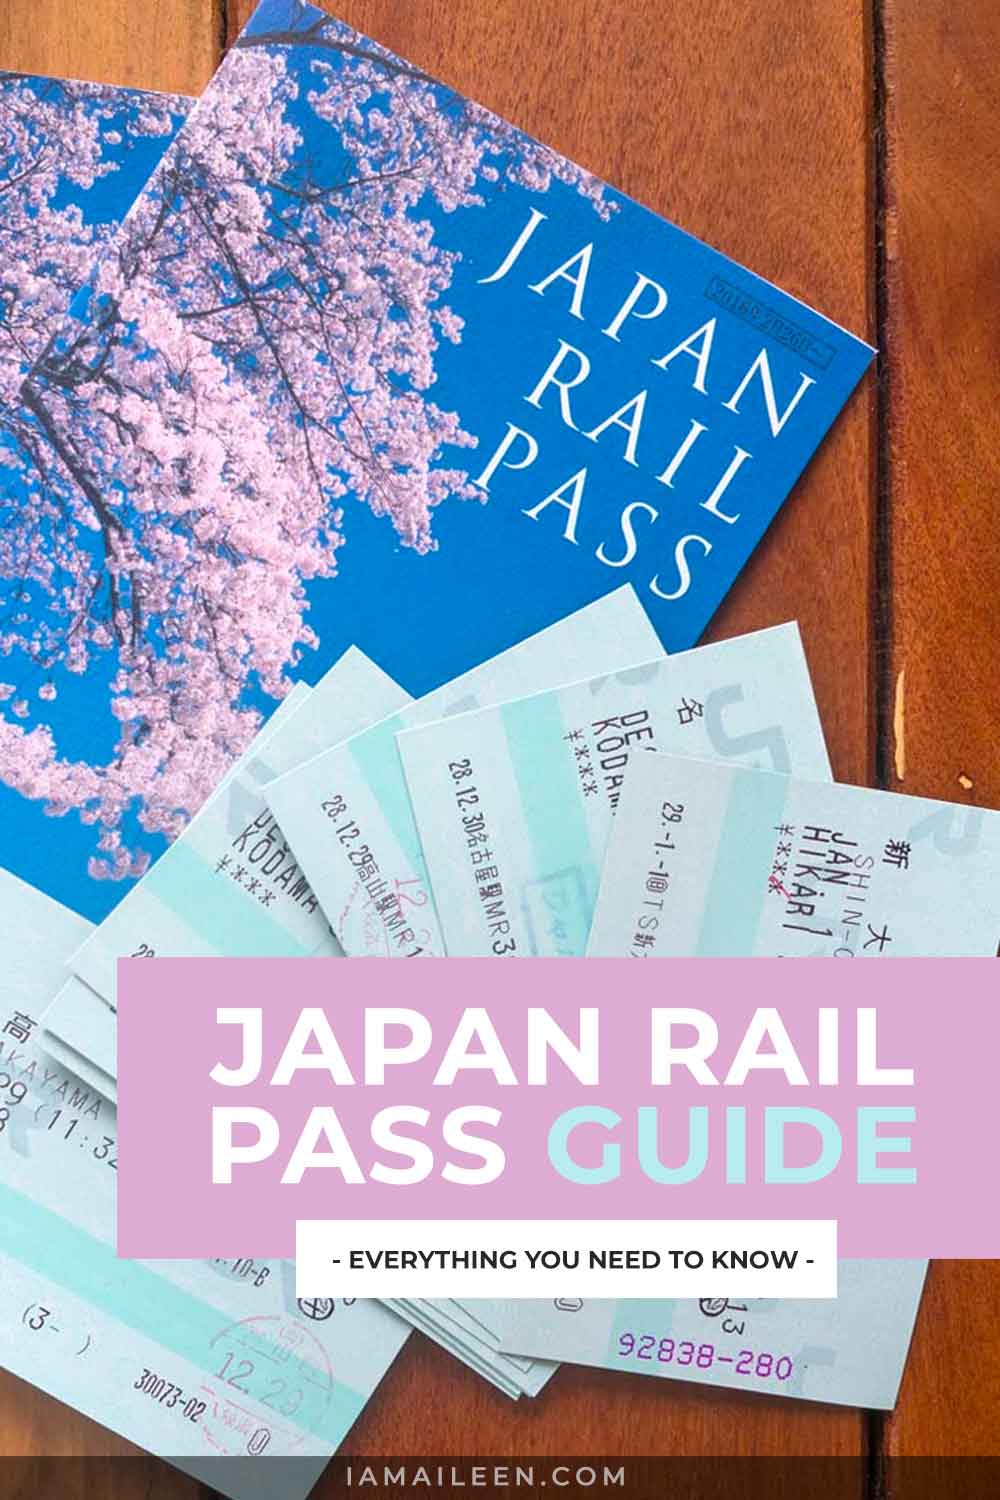 Japan Rail Pass Guide: Everything You Need to Know (Where to Buy? Is it Worth it? Etc.)